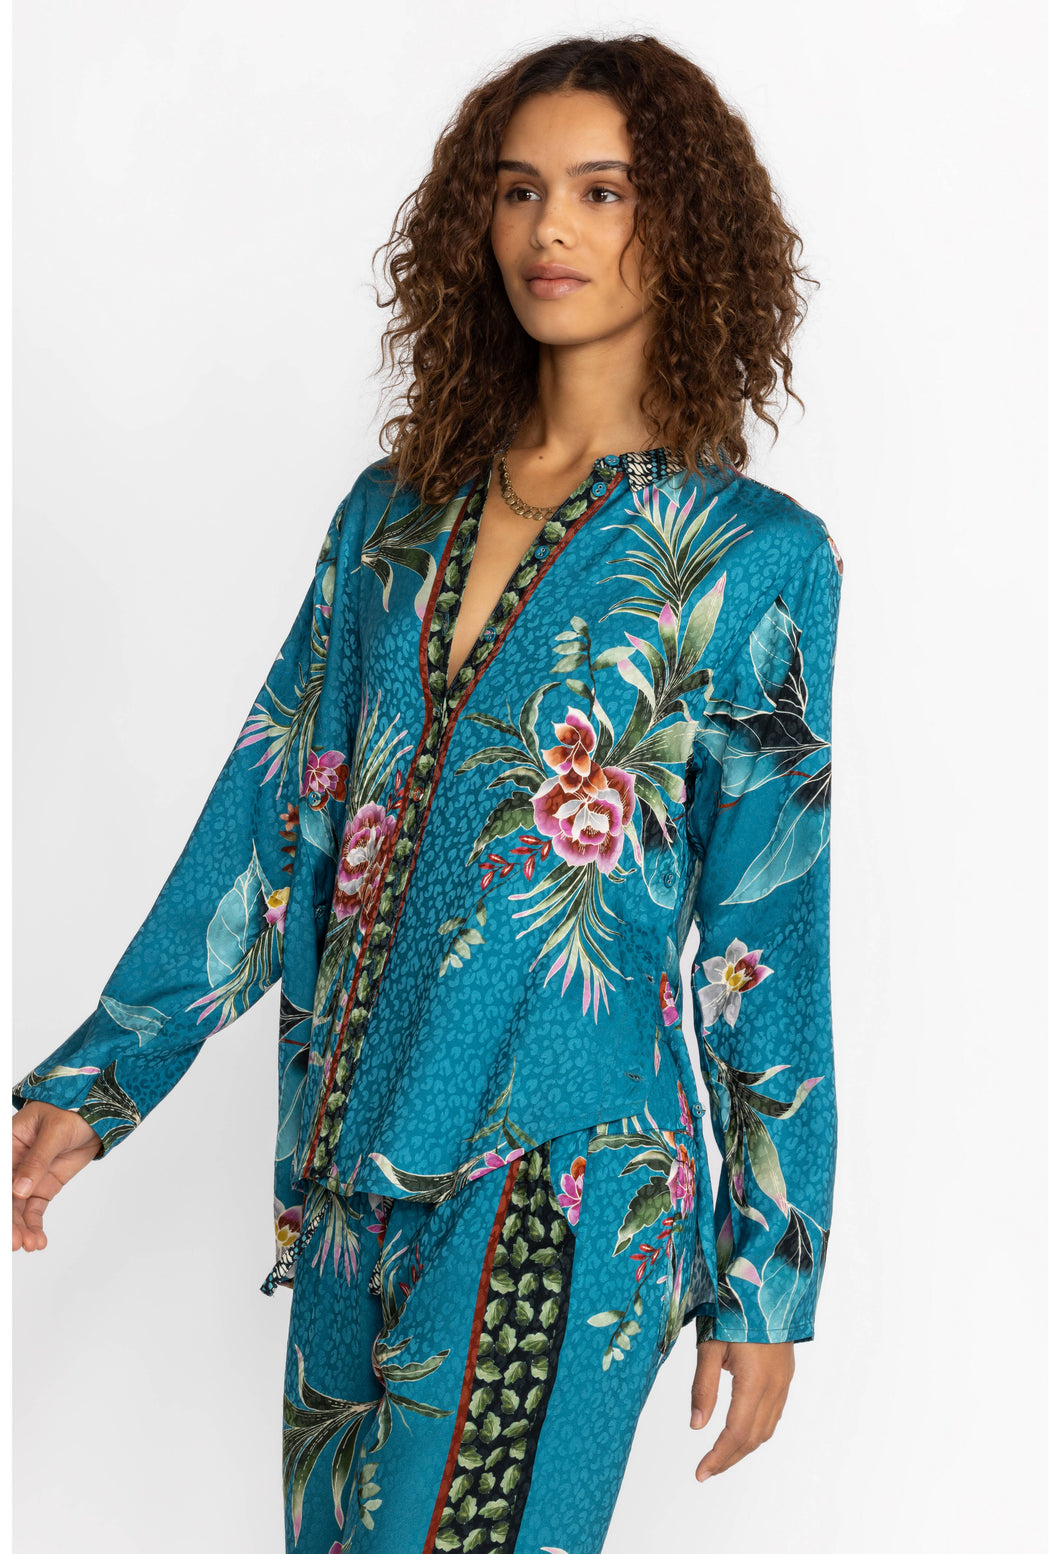 Lagoon Belinda Button Up Shirt by Johnny Was